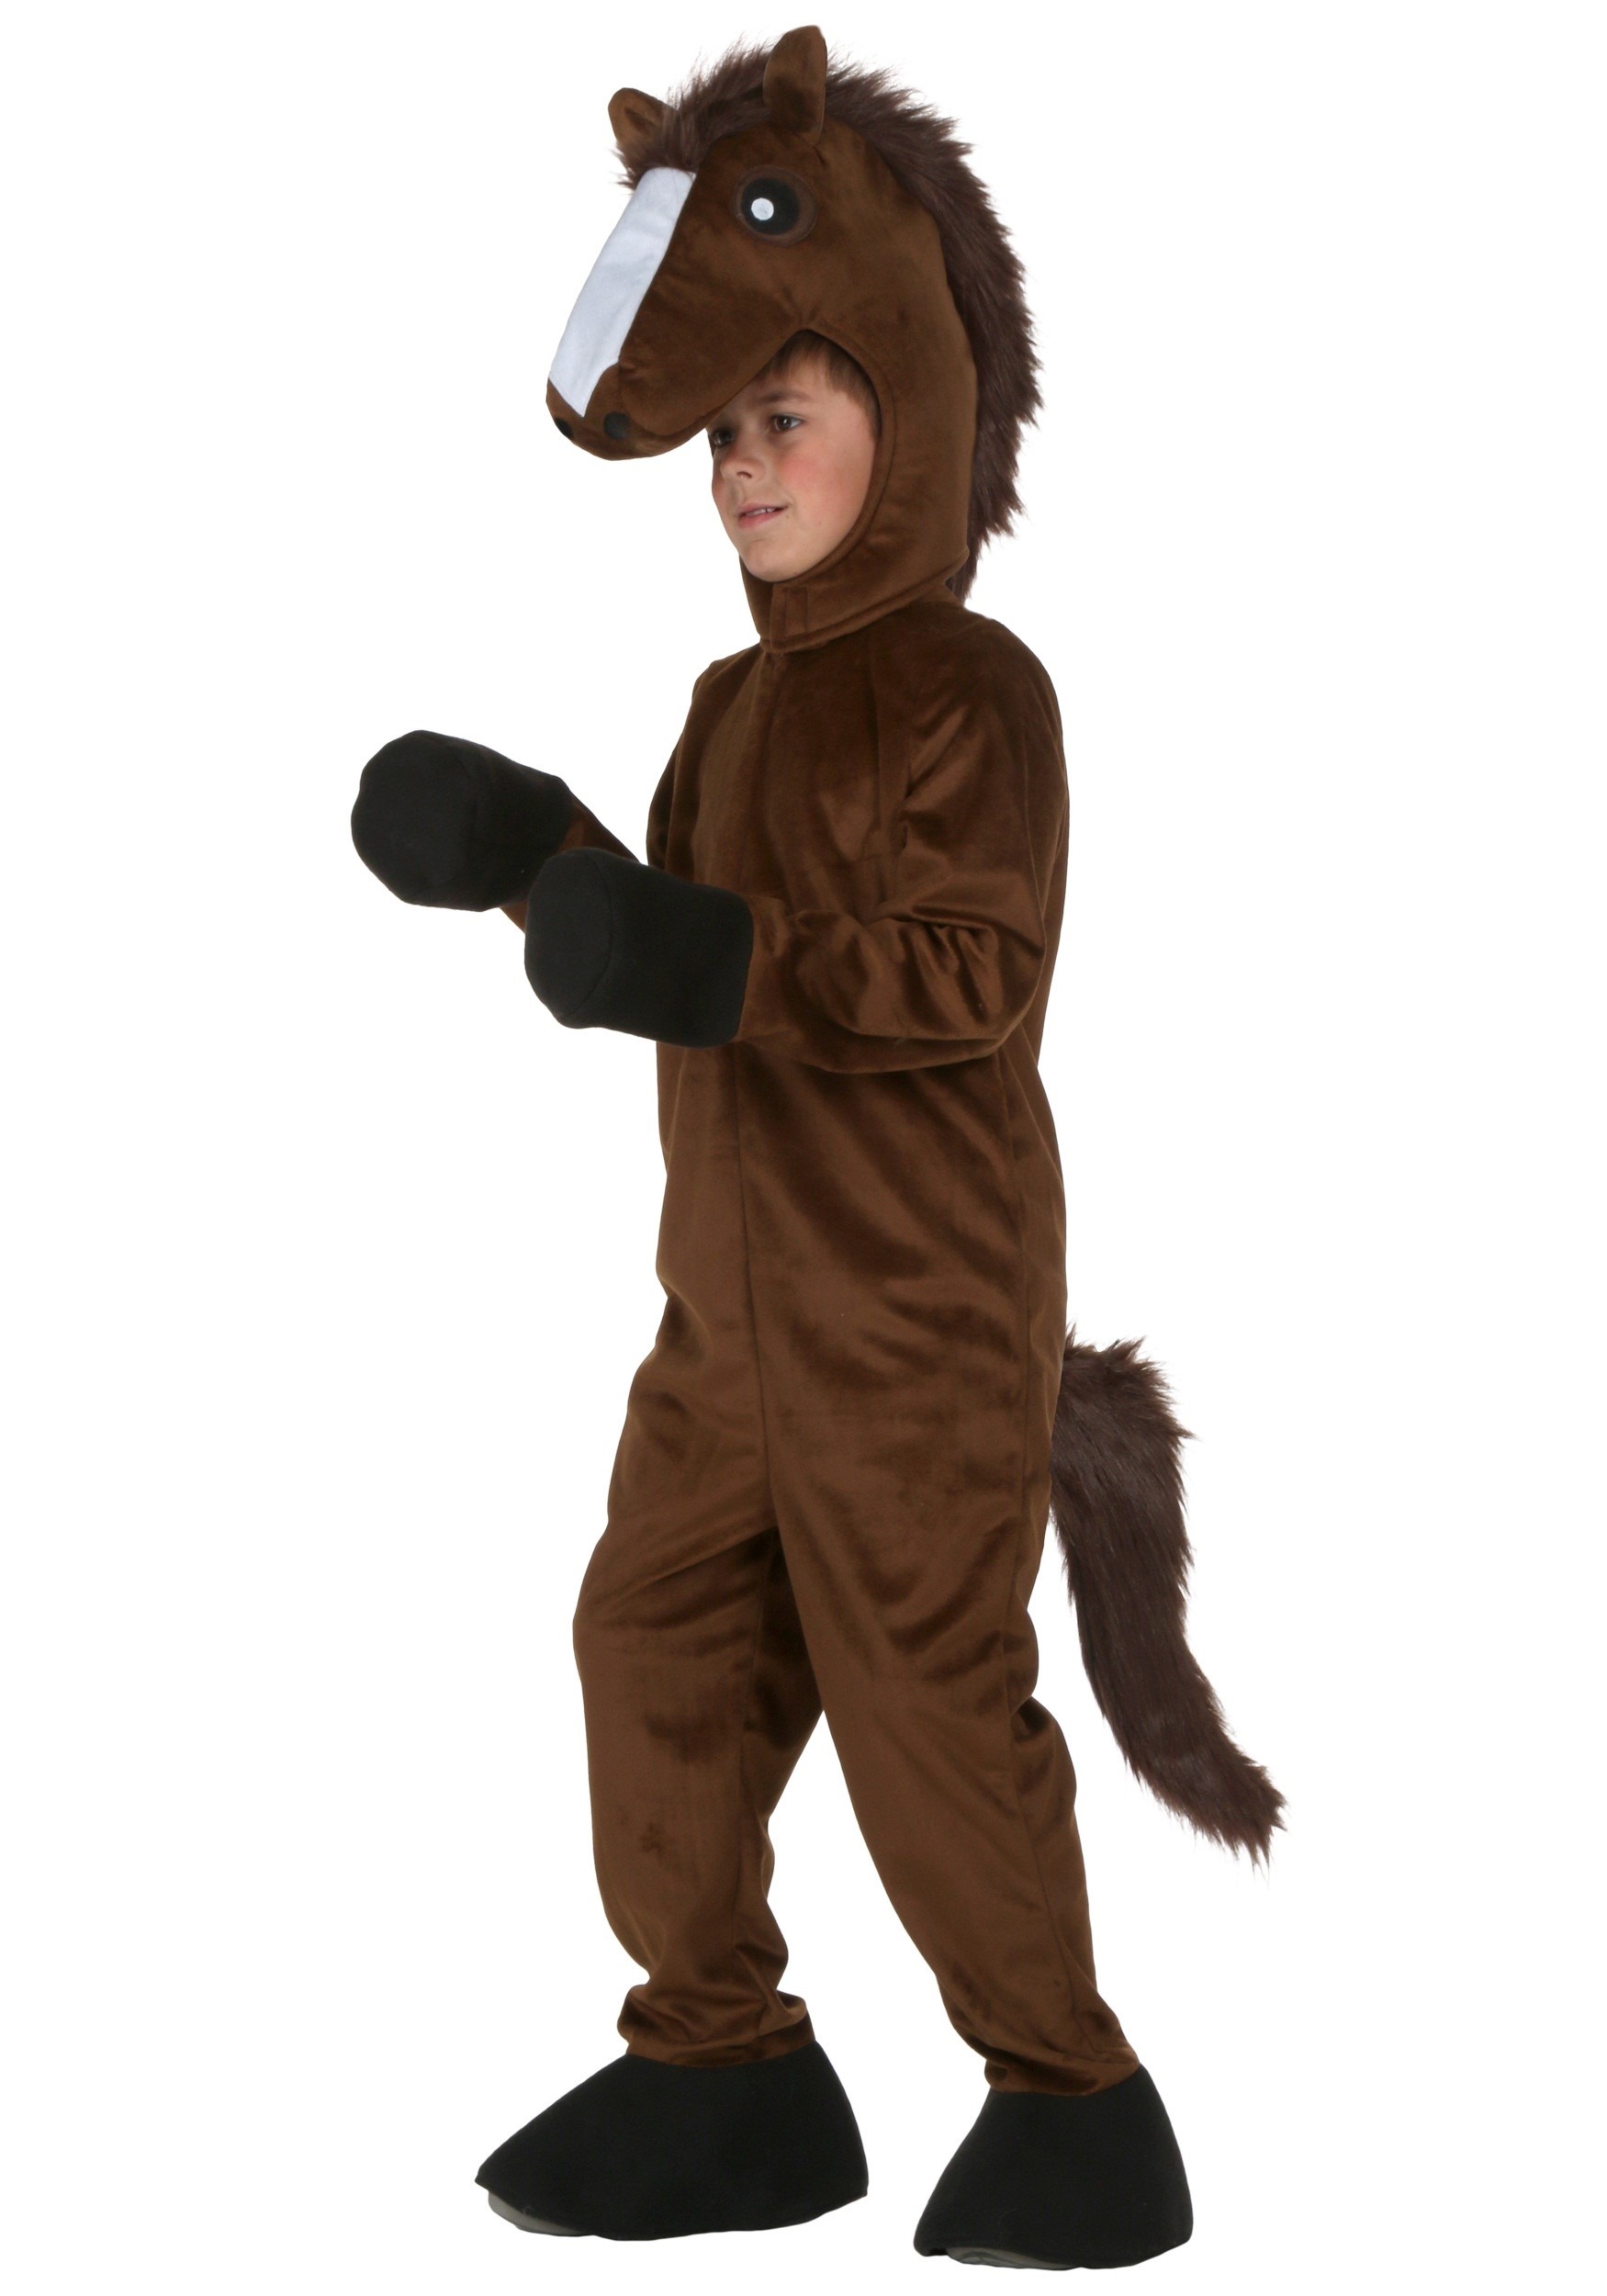 Horse Costume for Kids W/ Full Suit | Exclusive | Made By Us